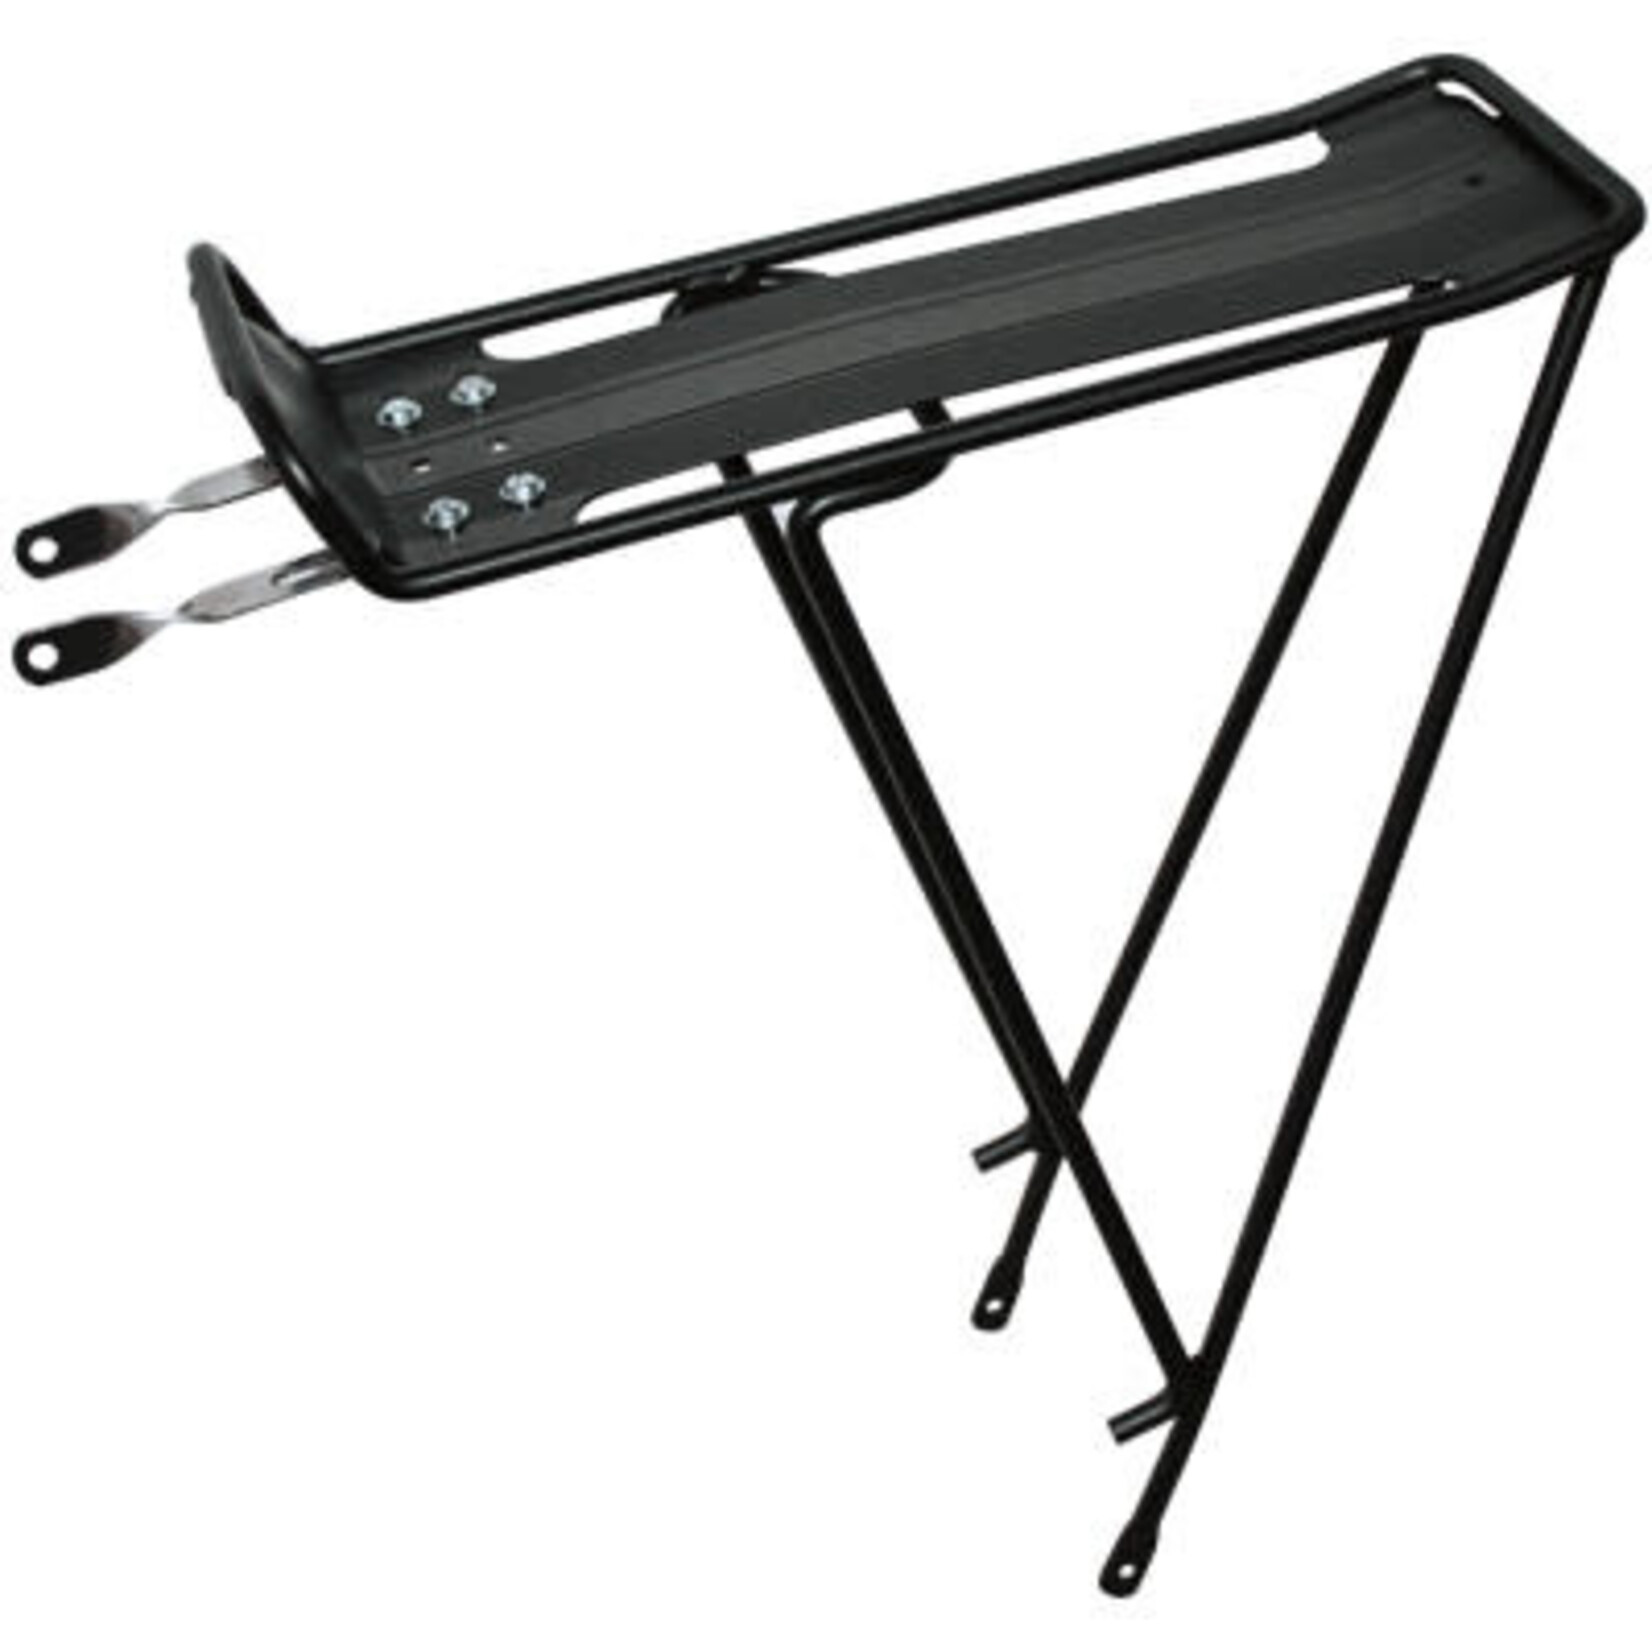 UNITED ENGINEERING CORP. UC Rear Rack, Alloy, Black Fits 700c/ 29/ 27.5 55lbs max